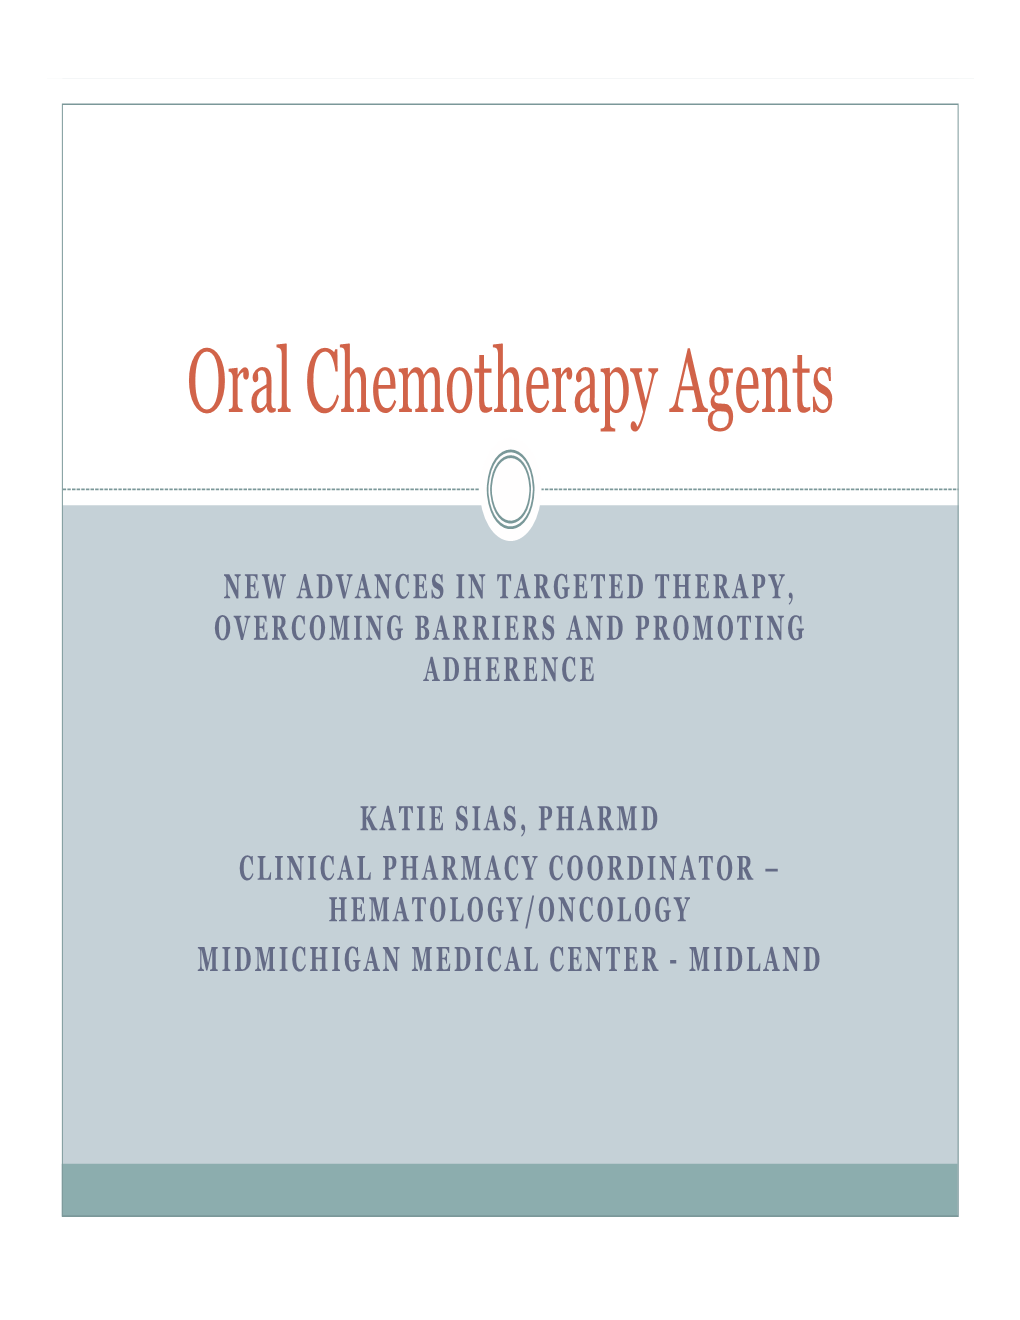 Oral Chemotherapy Agents